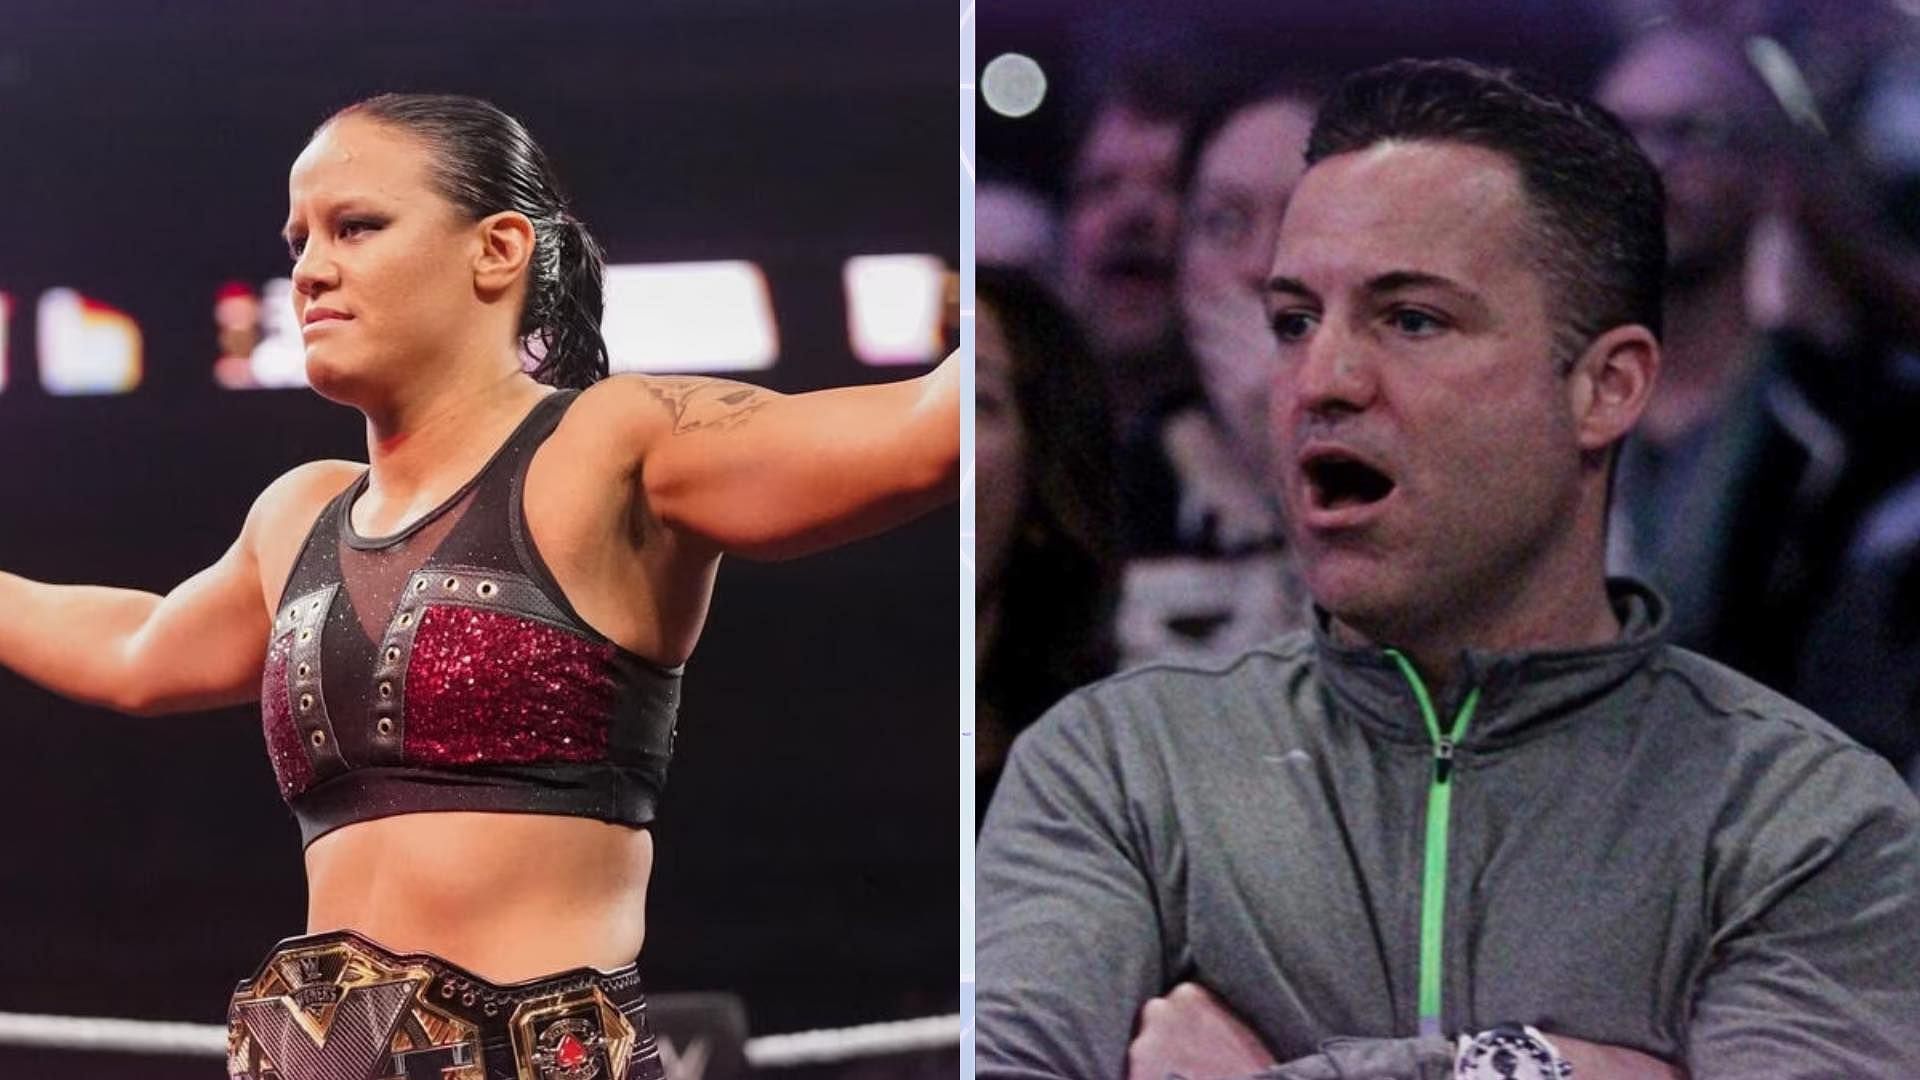 Some are curious if Shayna Baszler is leaving WWE